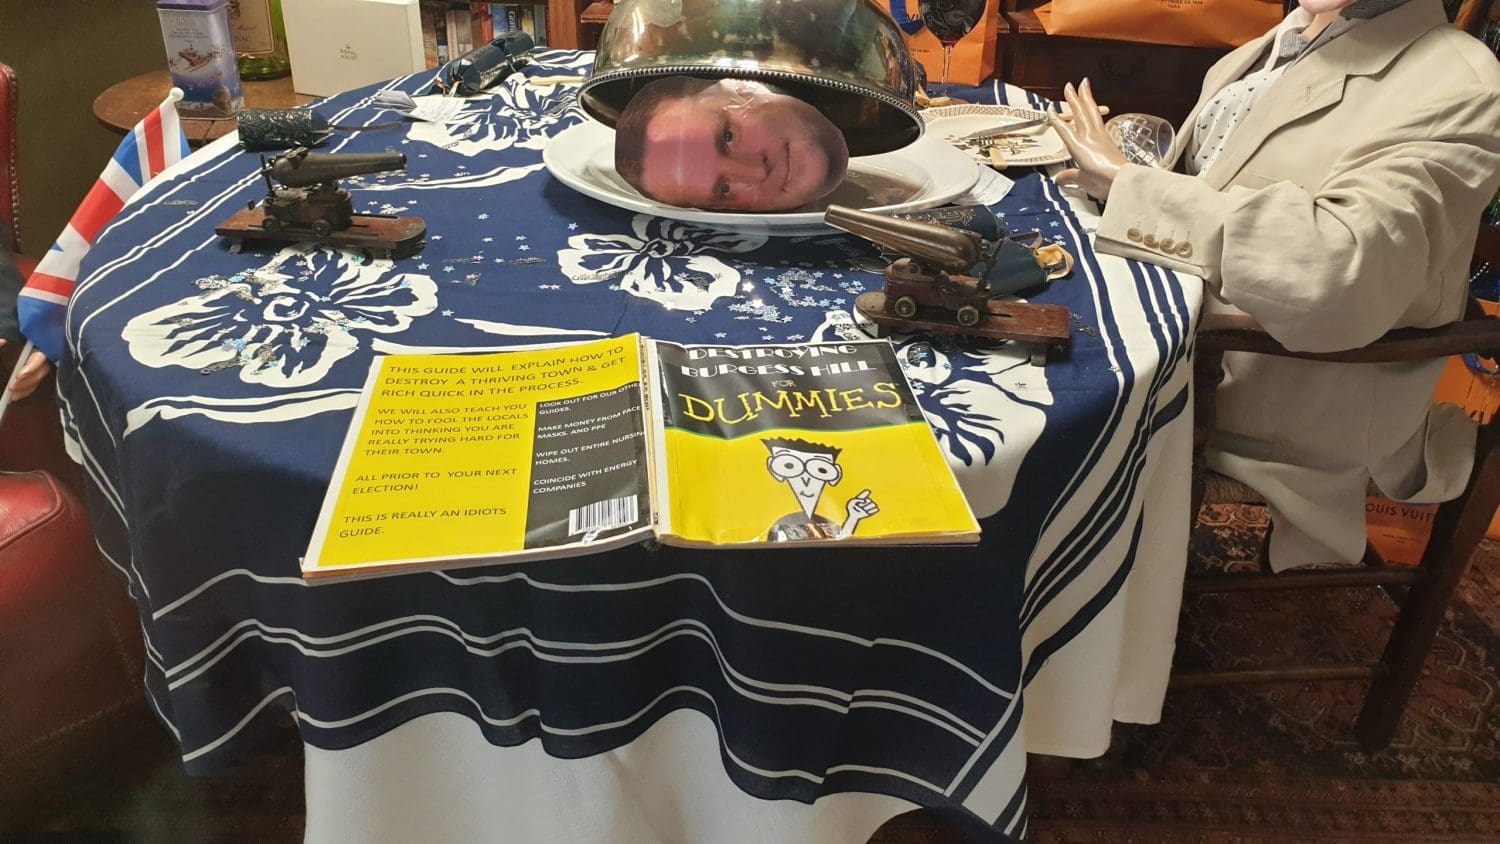 The Tories dining table with a book called "Destroying Burgess Hill for Dummies", aimed at the local Tory MP